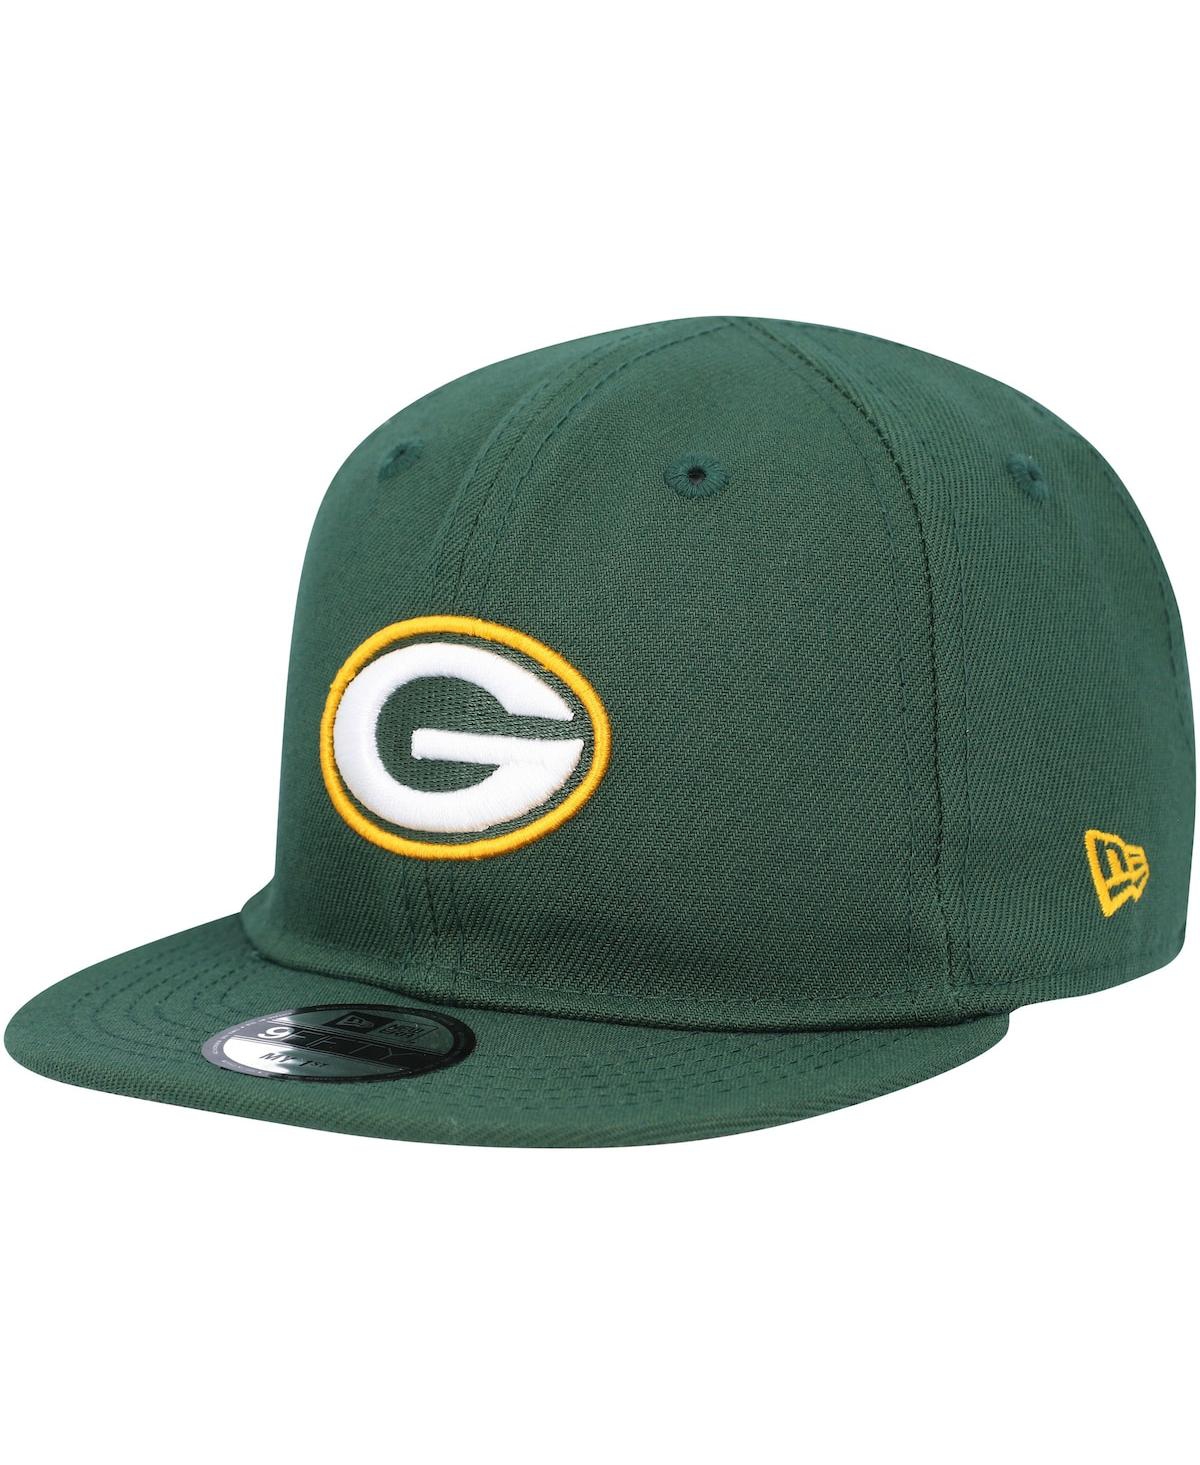 New Era Babies' Infant Boys And Girls  Green Green Bay Packers My 1st 9fifty Snapback Hat